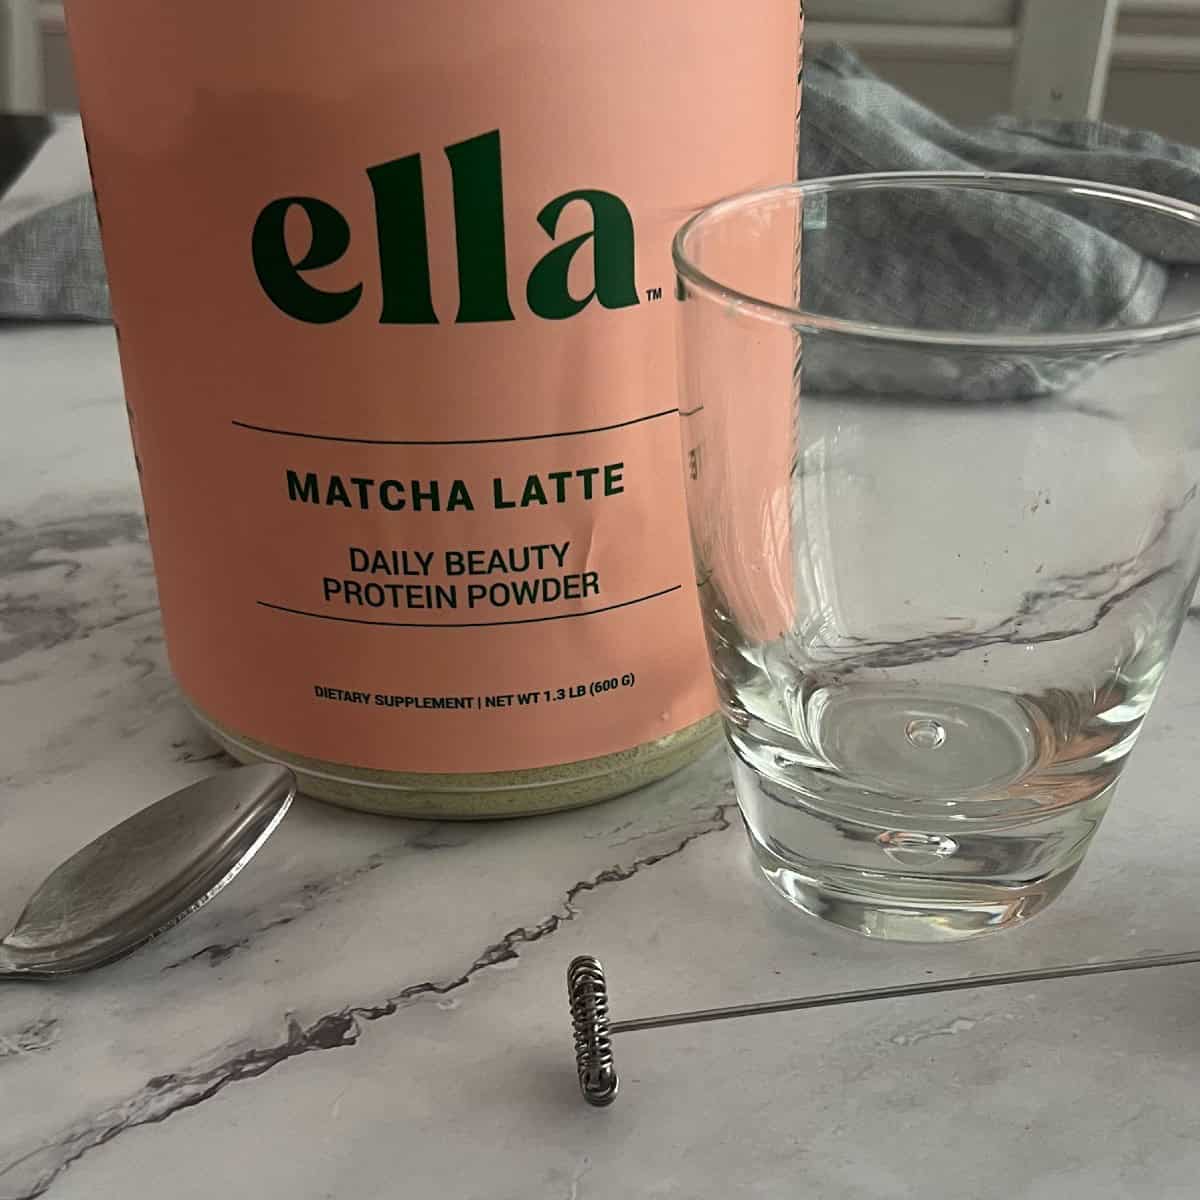 A glass of water sits next to a jar of matcha latte daily beauty protein powder. The jar has a black label with white and gold text. The text says "Naked Nutrition," "Ella" followed by "MATCHA LATTE," "DAILY BEAUTY," "PROTEIN POWDER," "DIETARY SUPPLEMENT